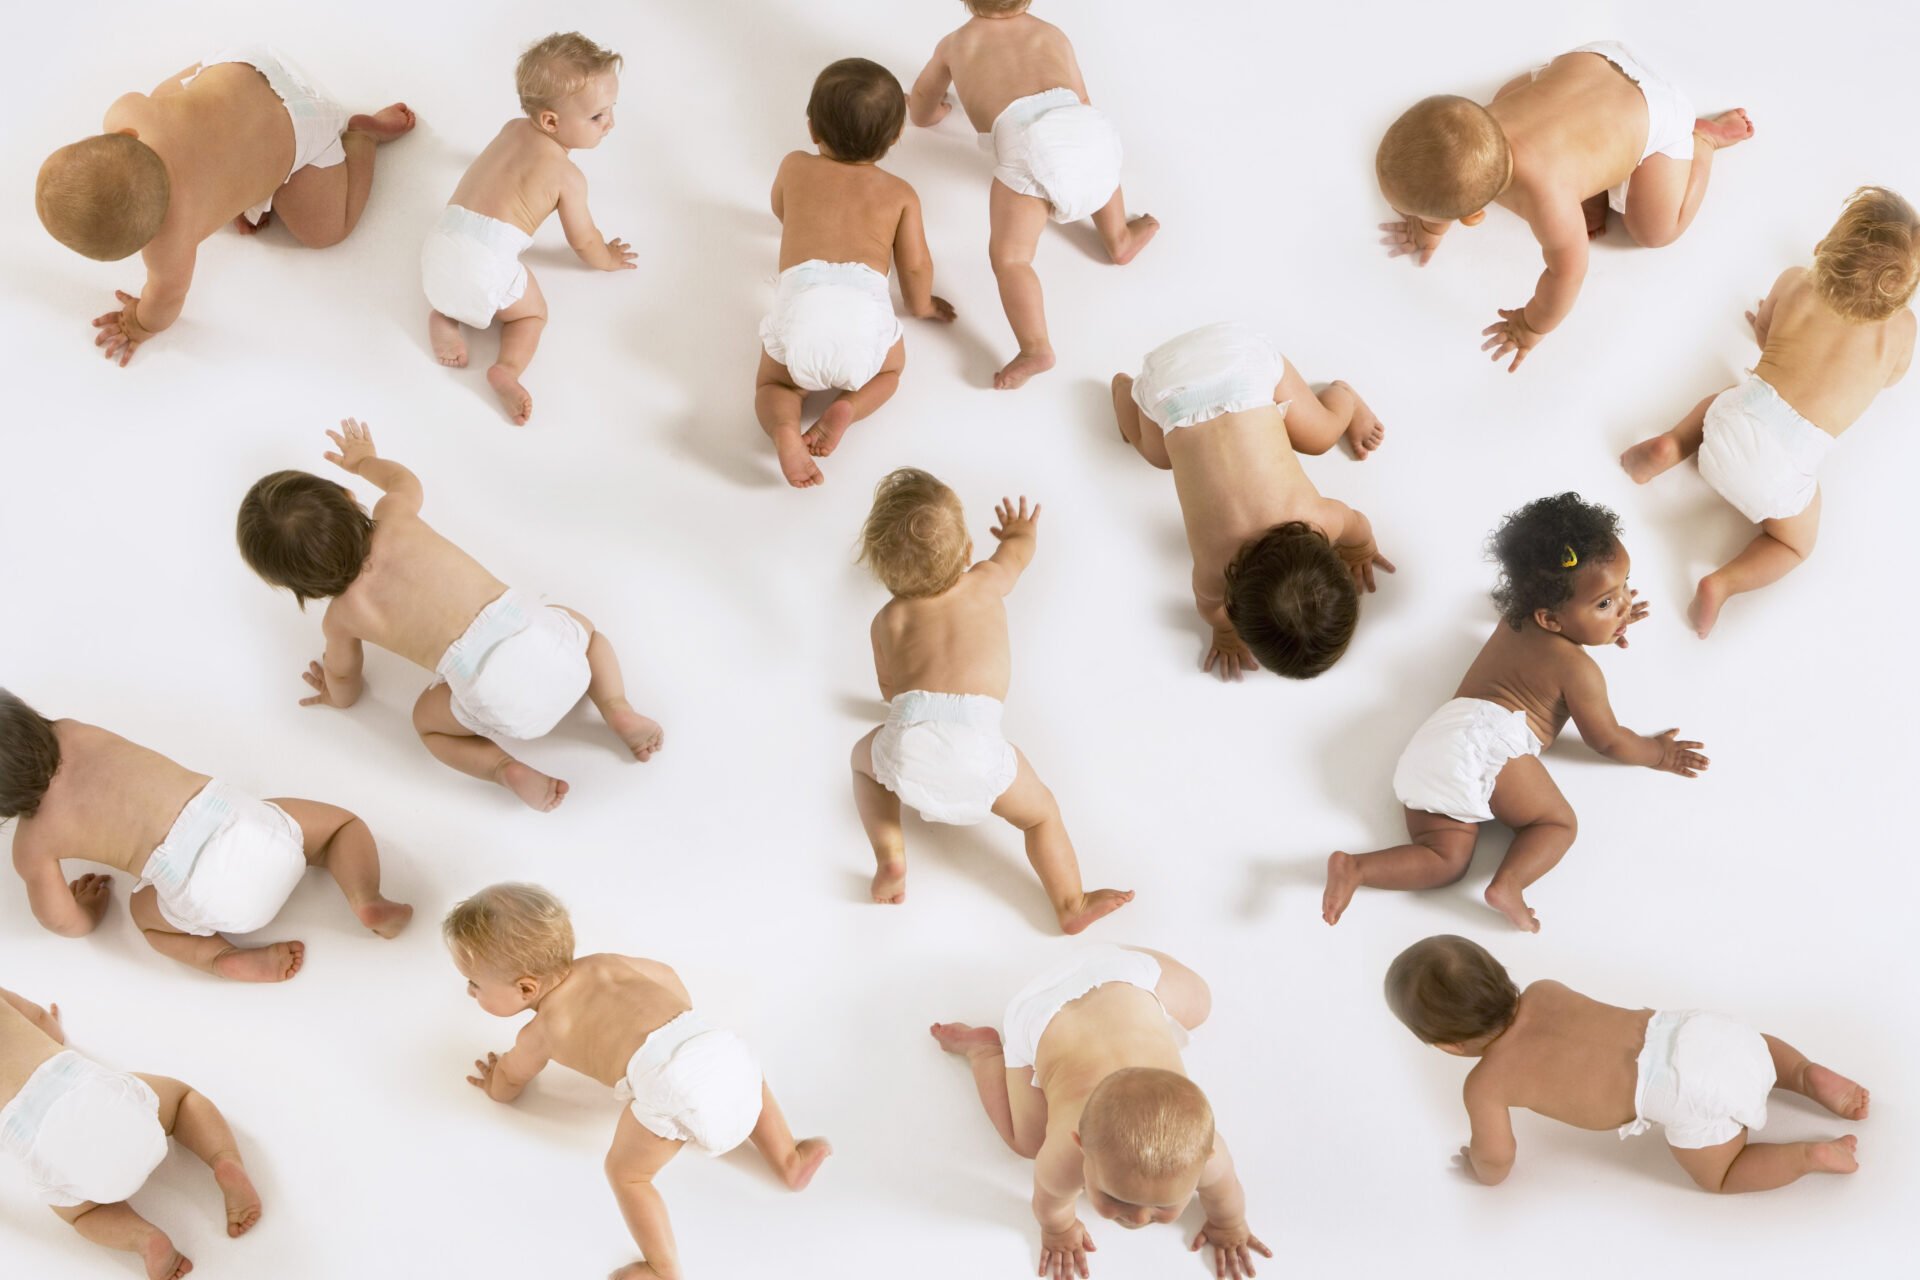 Babies crawling on the floor with diapers on